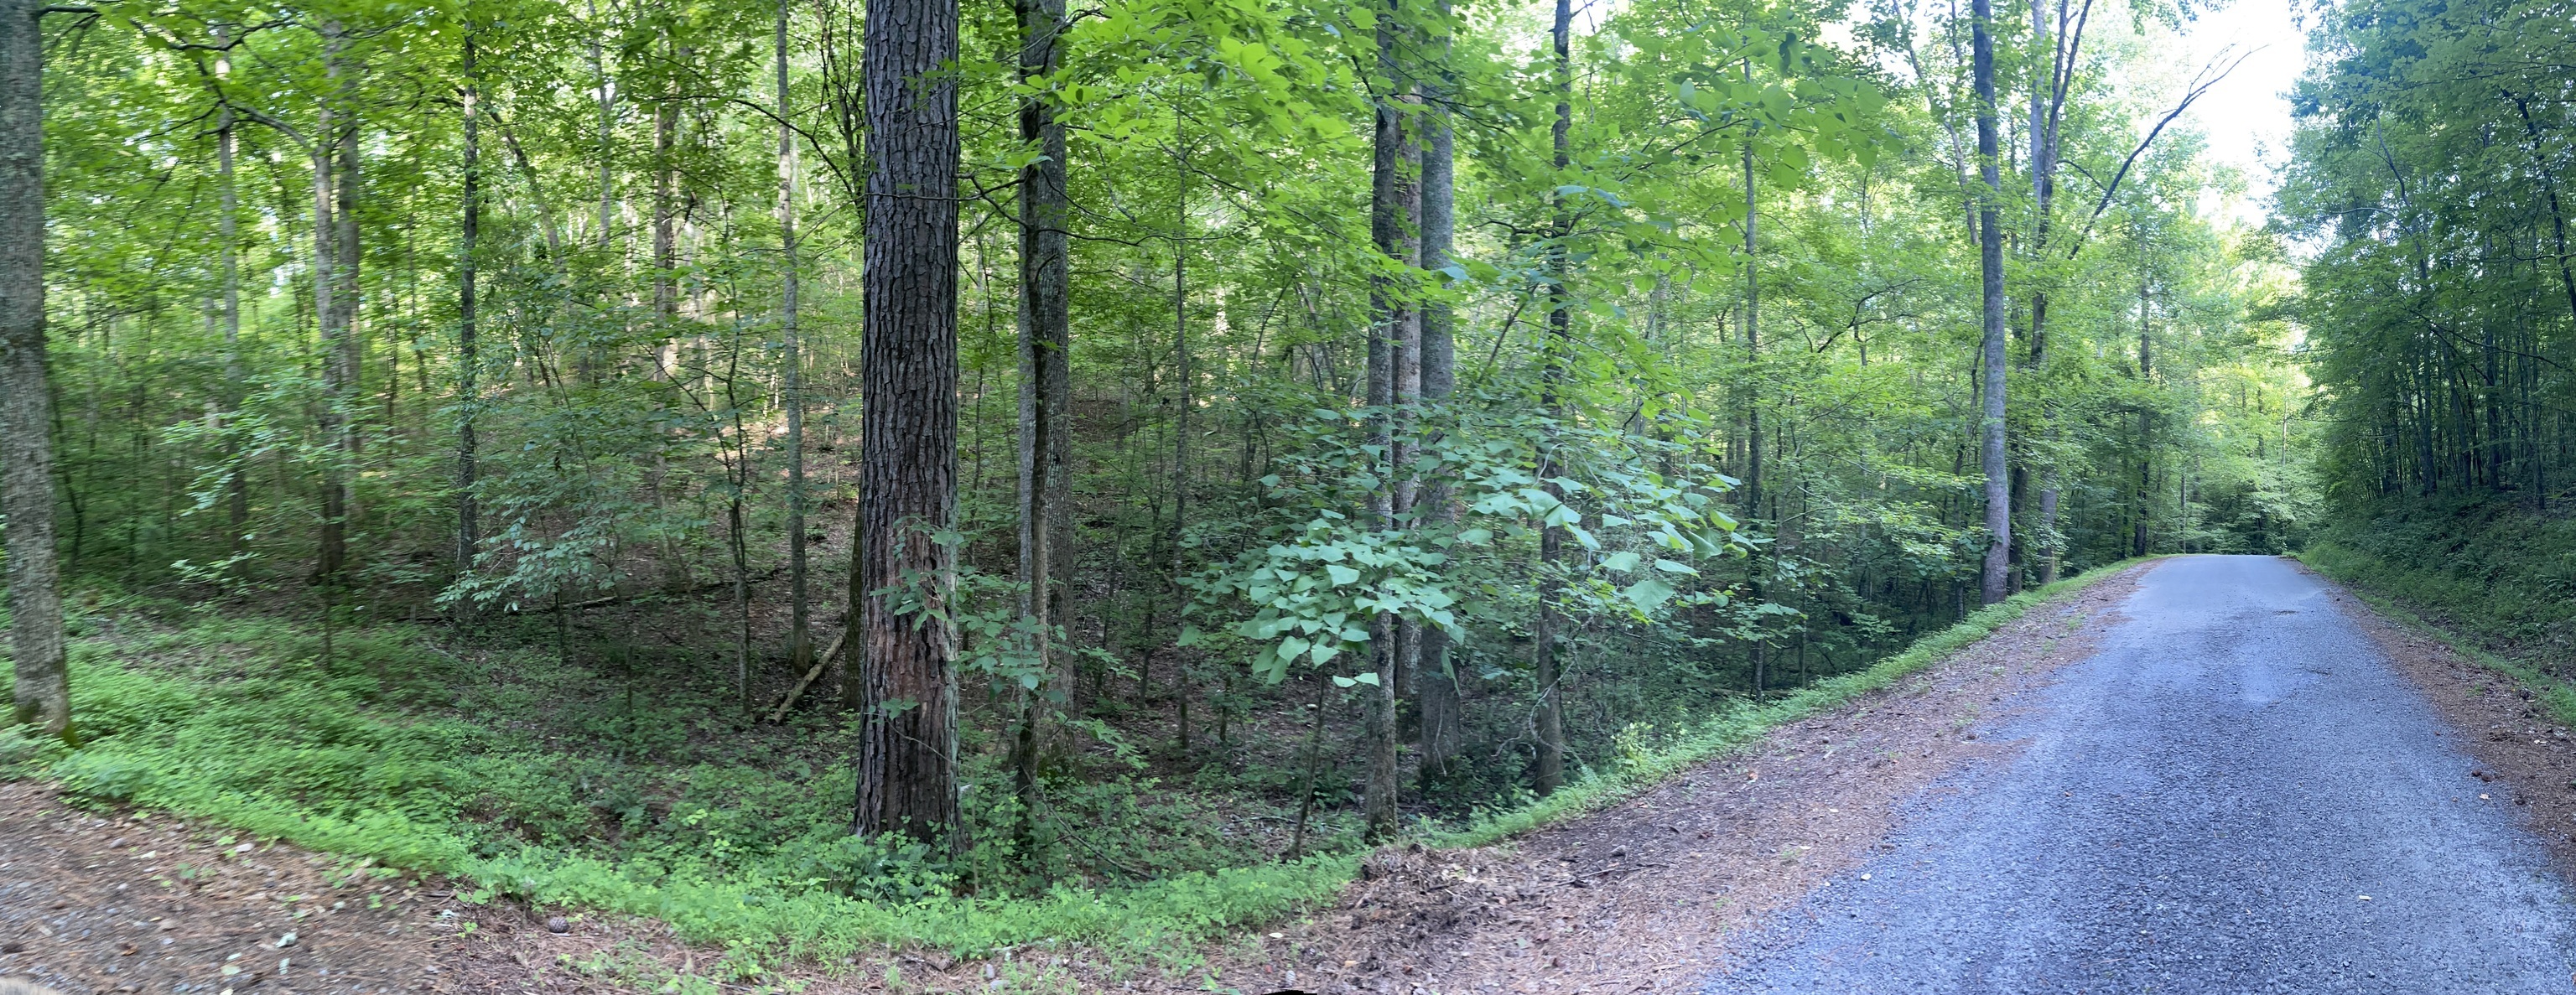 a view of a forest with trees